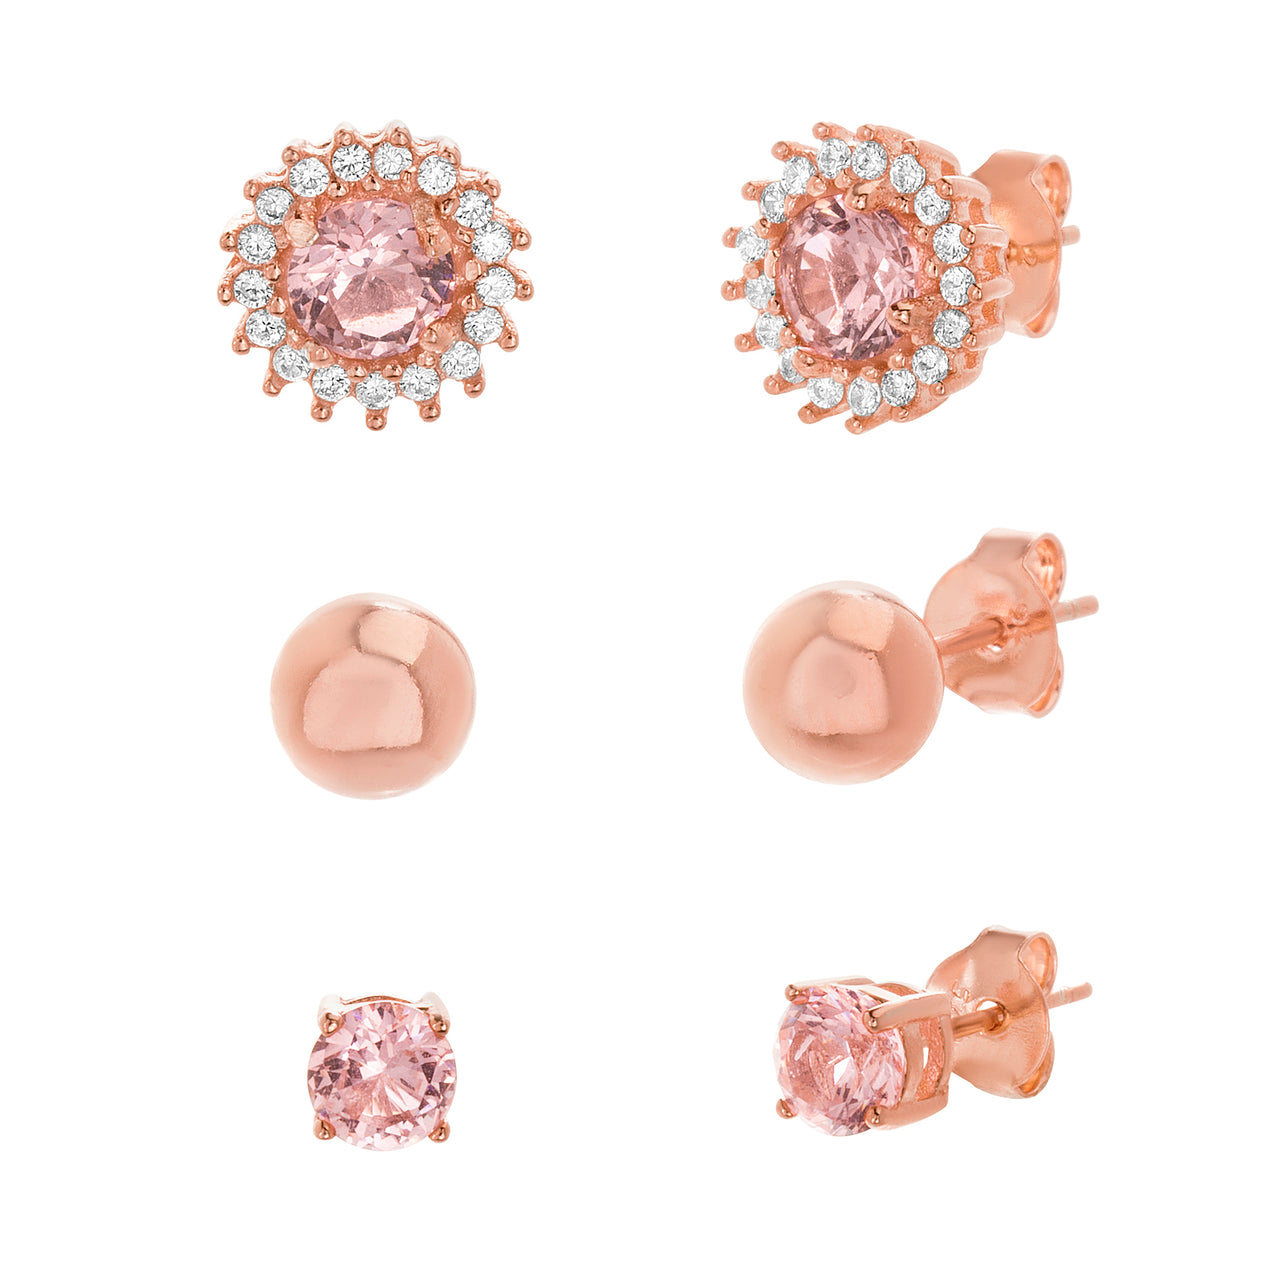 Simulated Morganite and Cubic Zirconia 4 Prong, Halo and Ball Stud 3 Pair Earring Set for Women in Rose Gold Plated 925 Sterling Silver